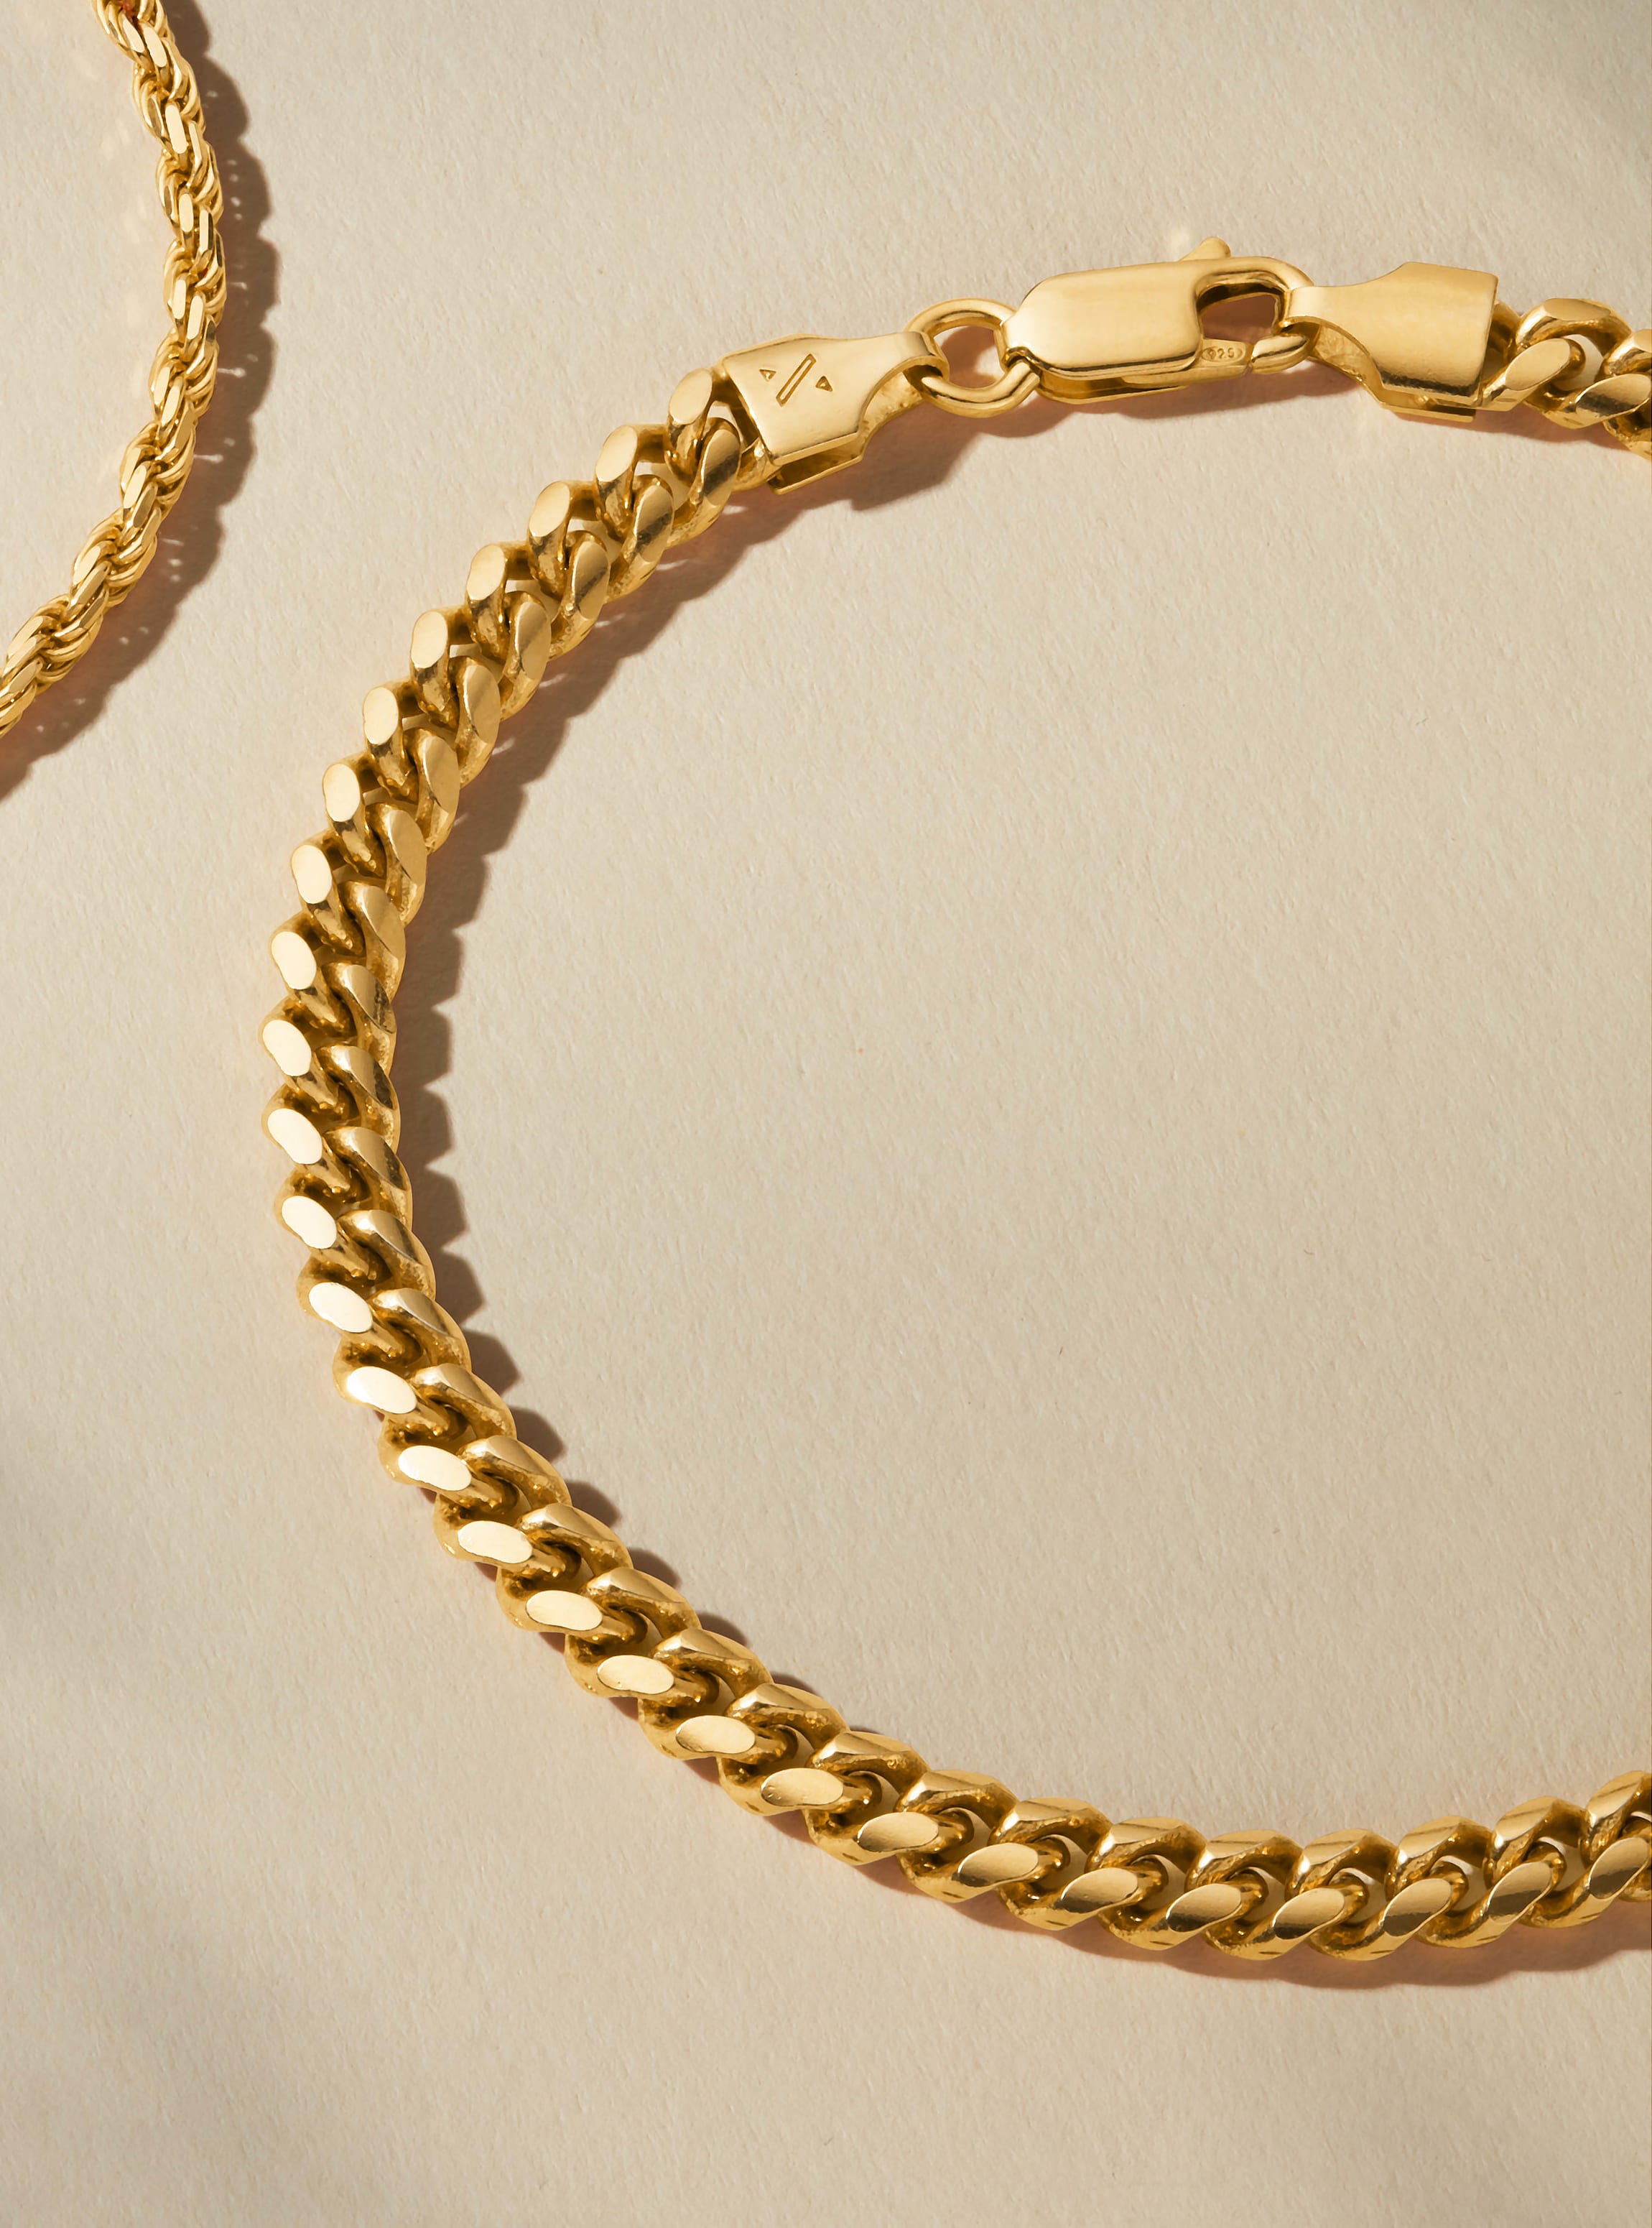 Image Cuban Link Bracelet - 5mm Gold - Made With Precious Metals